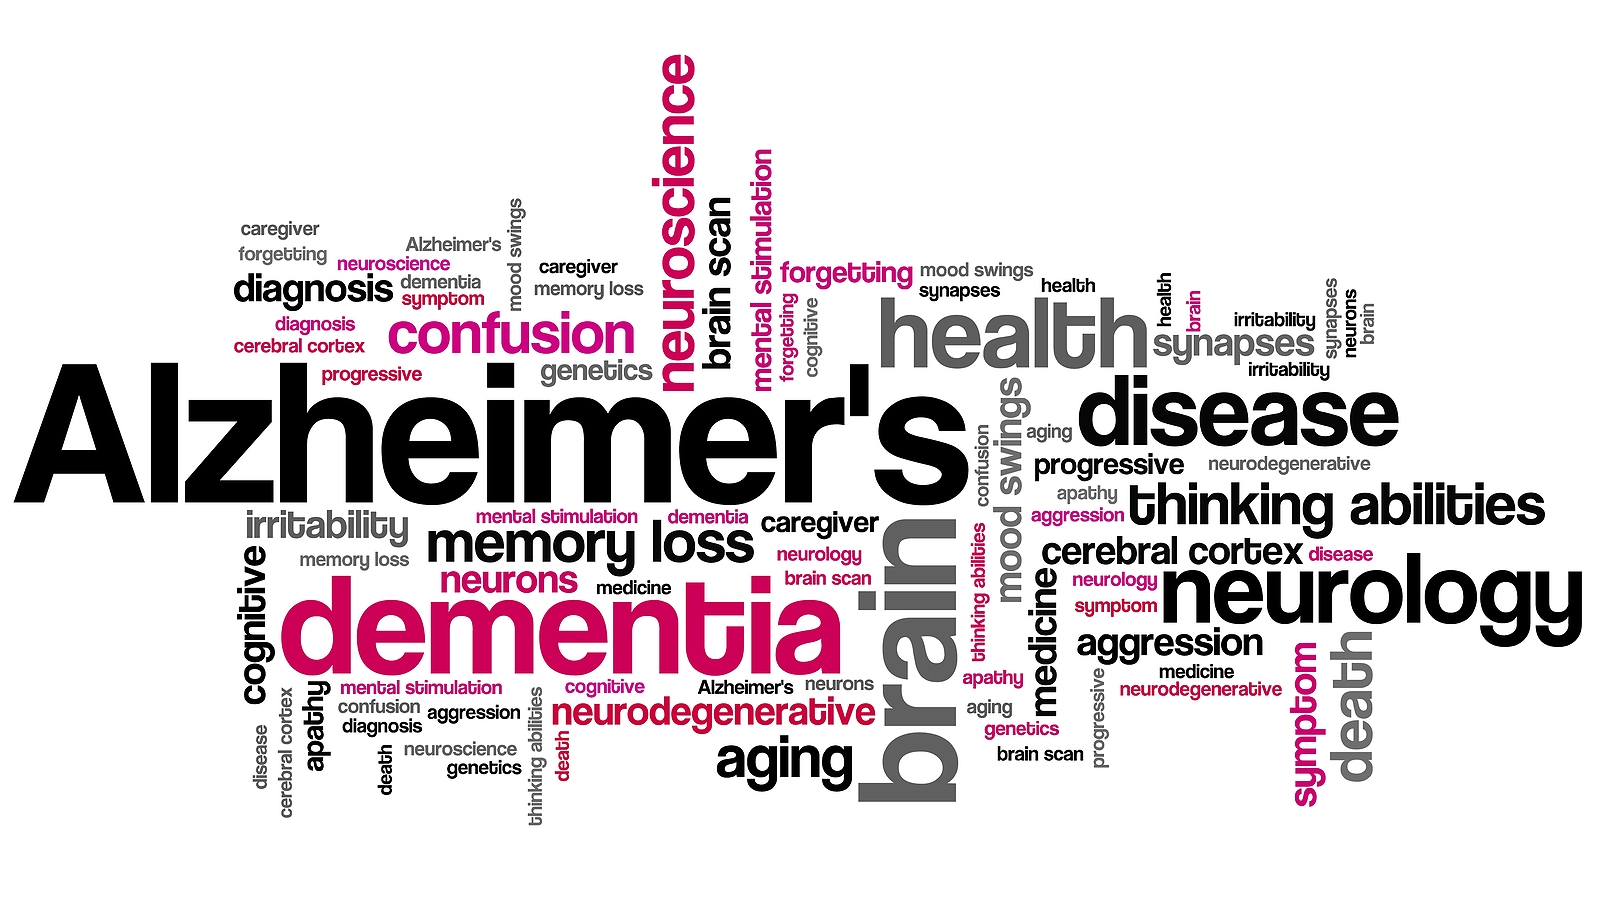 Recognizing the First Symptoms of Alzheimer’s